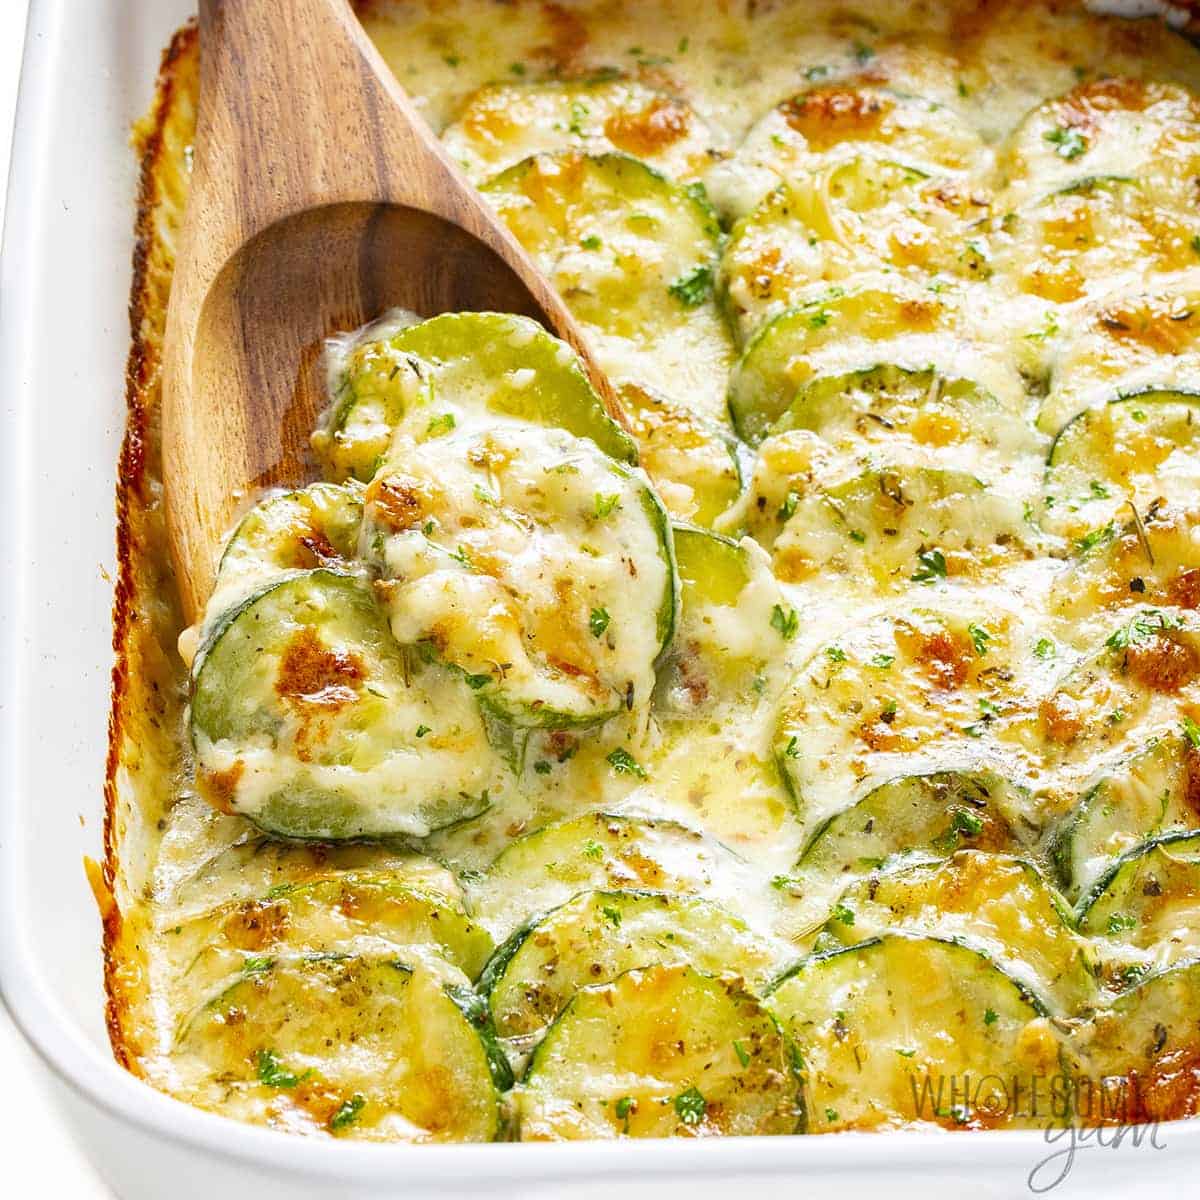 Baked zucchini casserole in a pan with a wooden spoon.